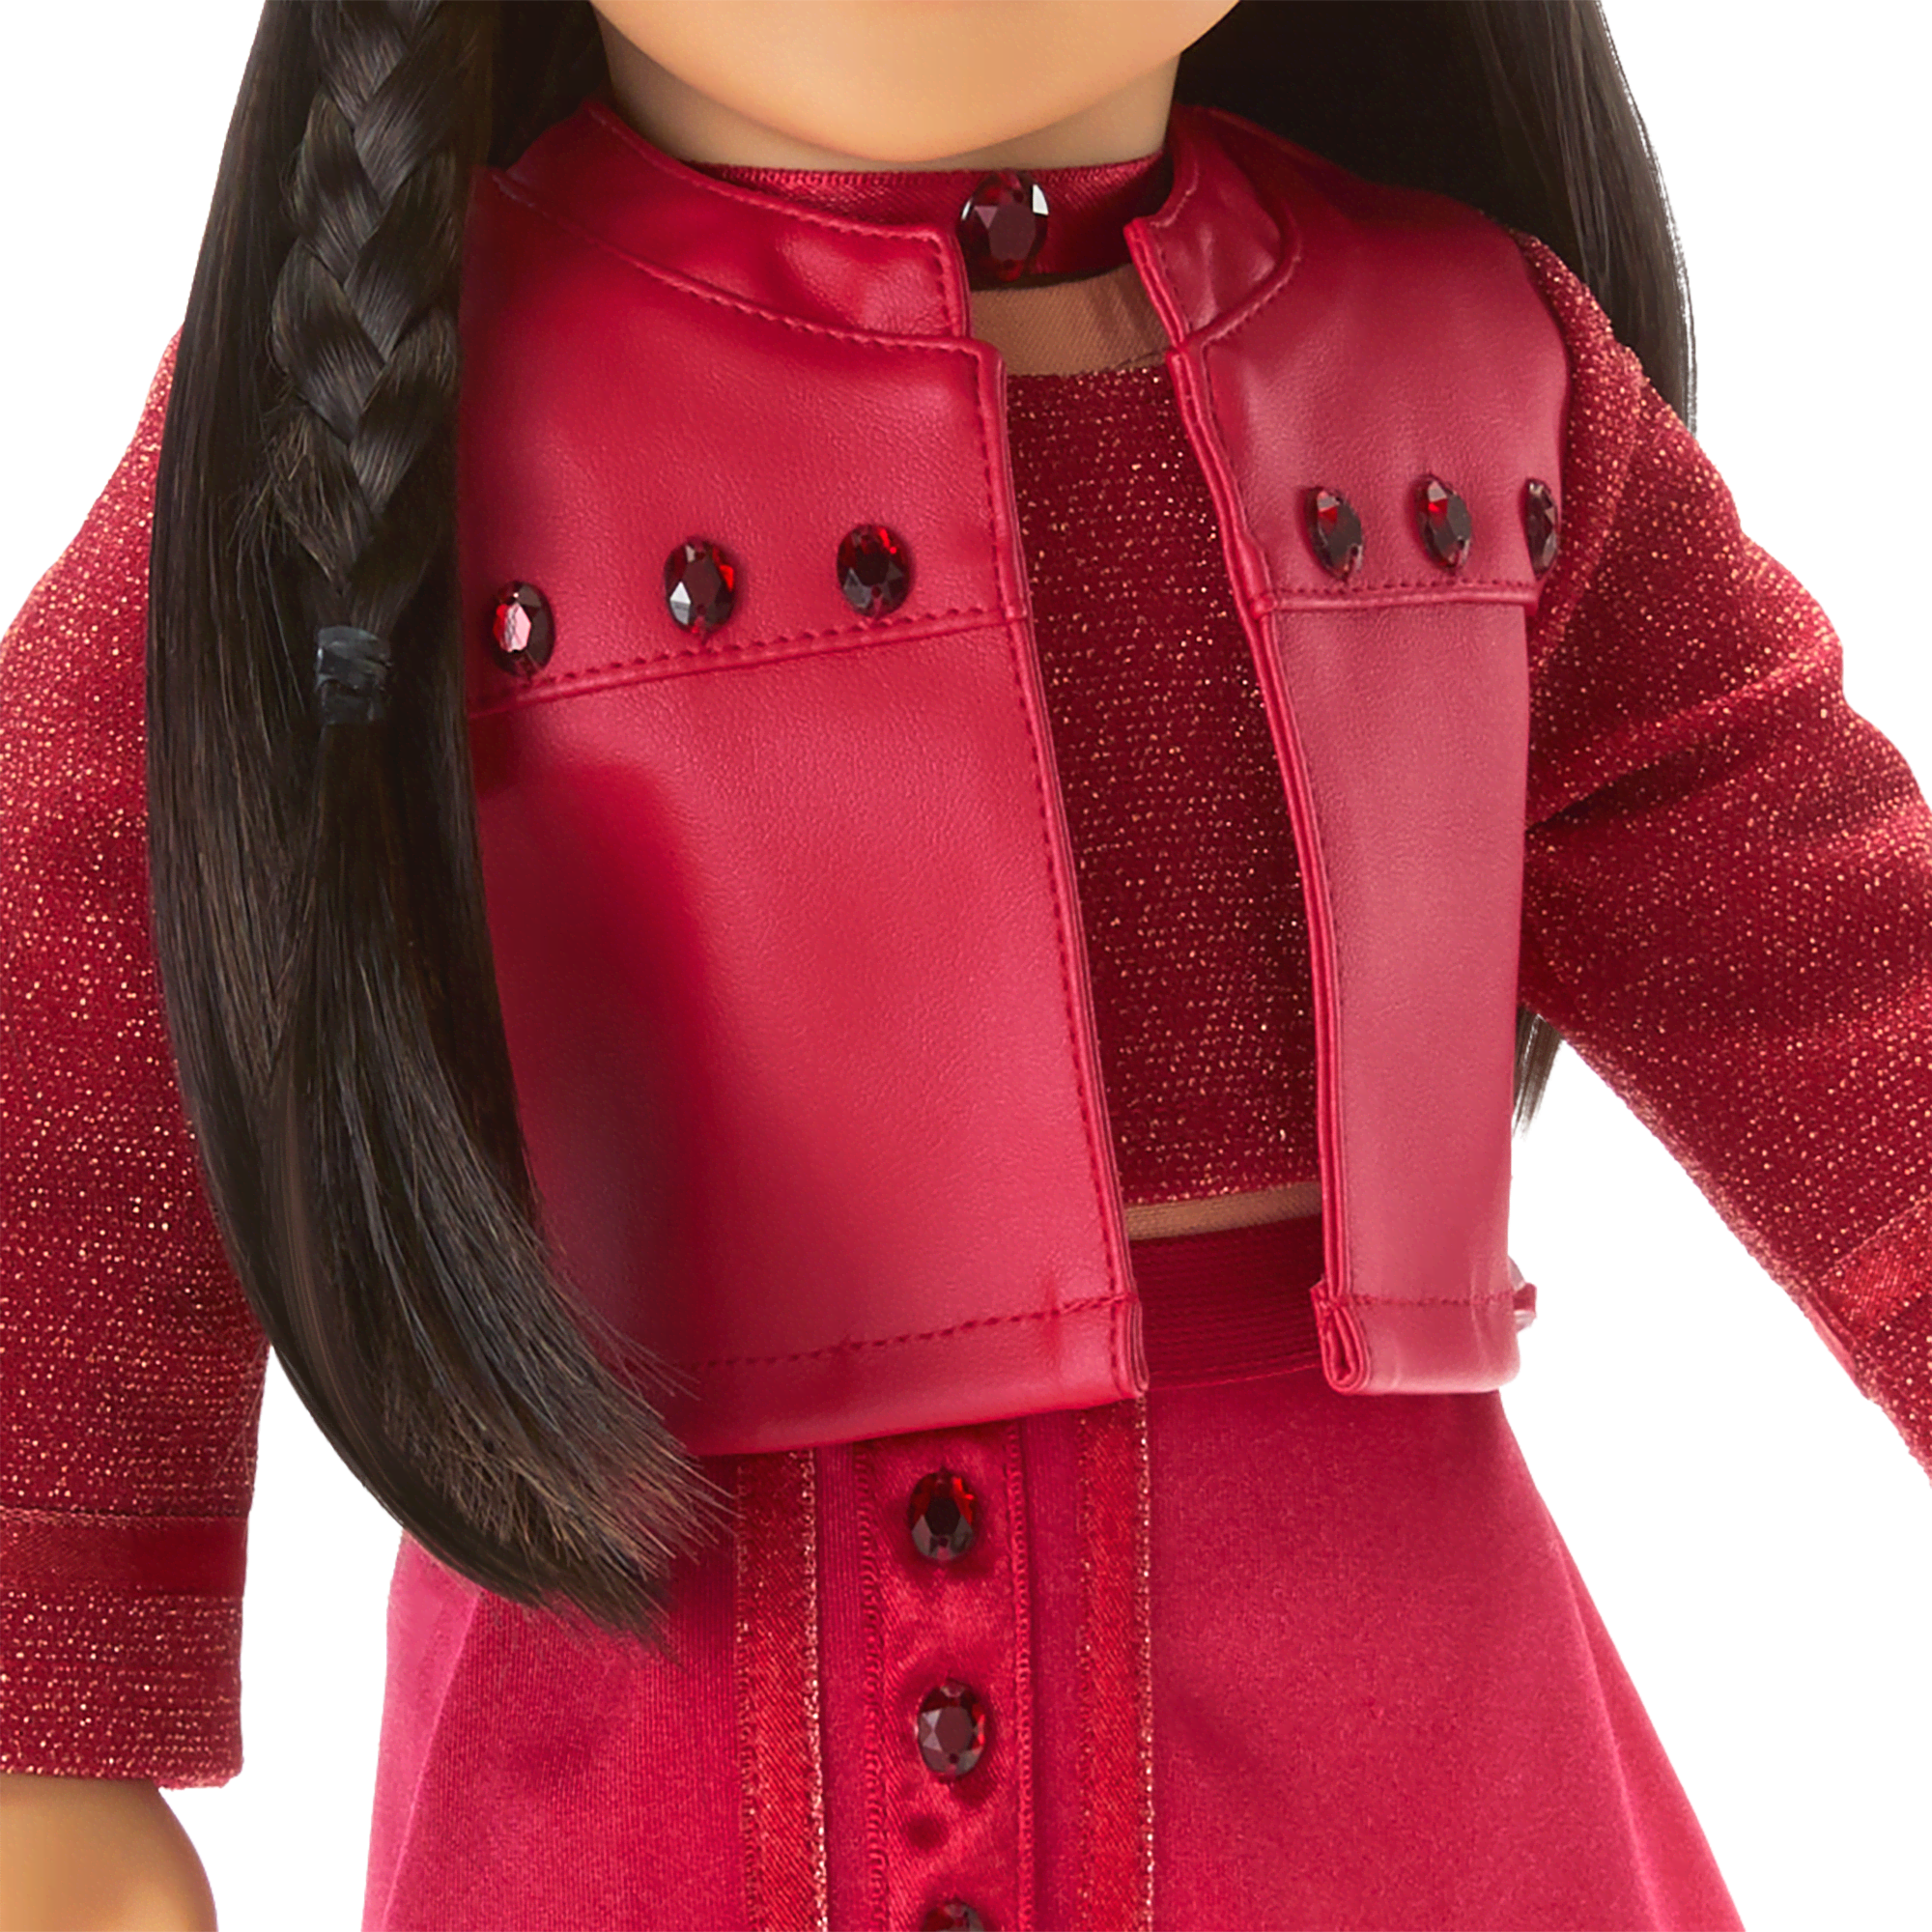 January Gorgeous Garnet Outfit for 18-inch Dolls